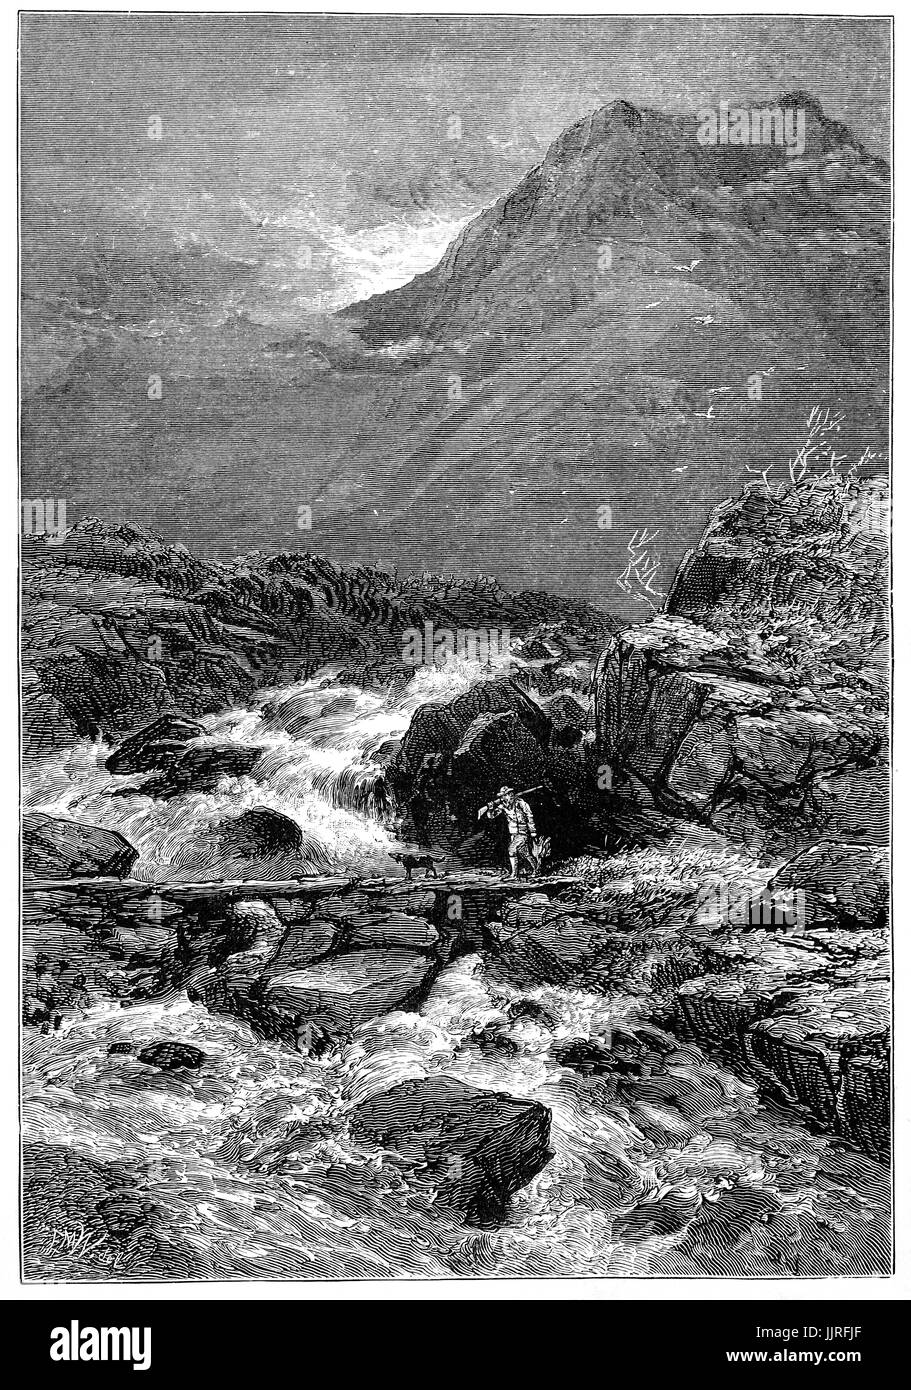 1870: Homeward bound after hunting, a man and dog cross the steam from Llyn Idwal, a small lake within Cwm Idwal in the Glyderau Mountains of Snowdonia, Gwynydd, North Wales. Stock Photo